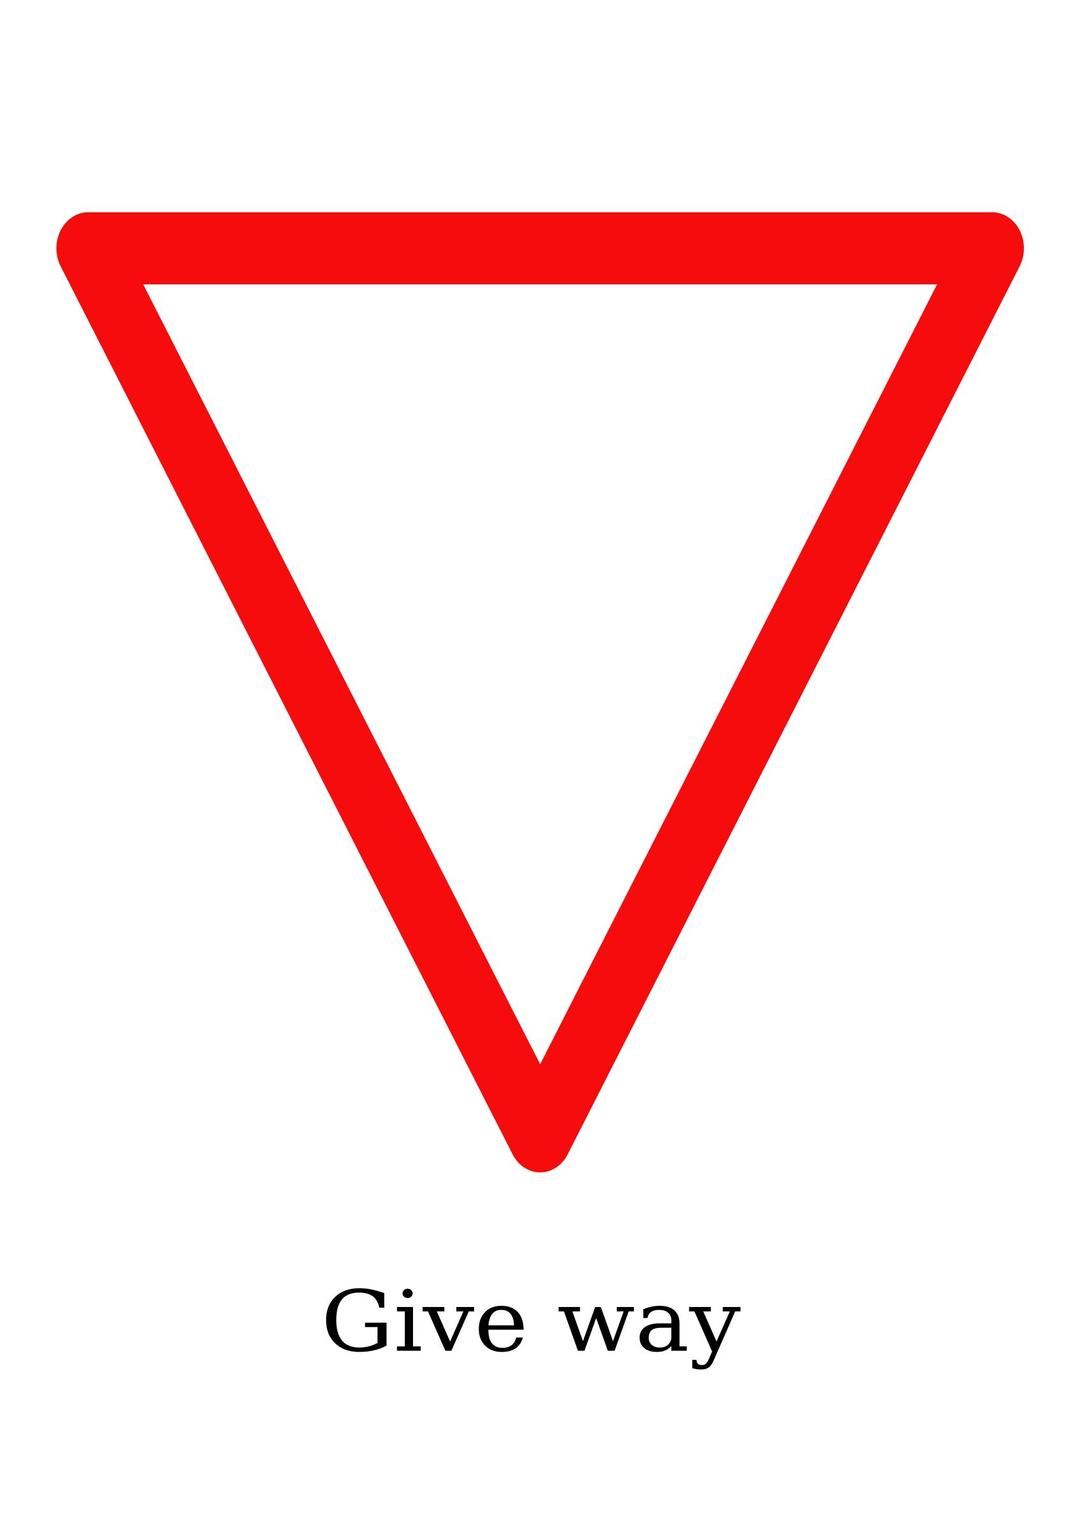 Indian road sign - Give way png transparent